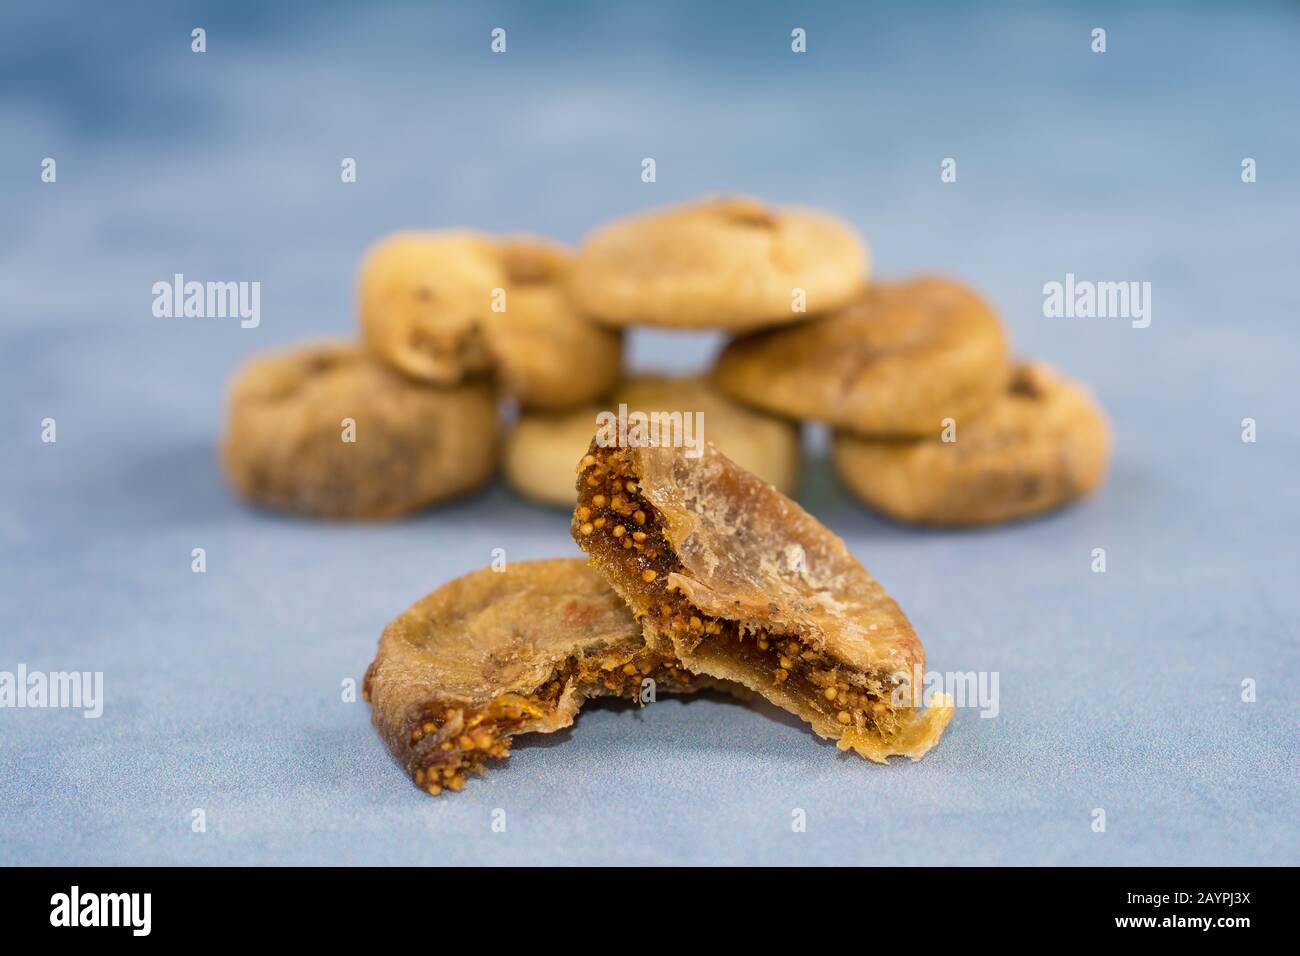 Dried figs. A mature common fig syconium torn apart, showing its numerous one-seeded fruits. A few dried figs stacked in a blurry background. Stock Photo